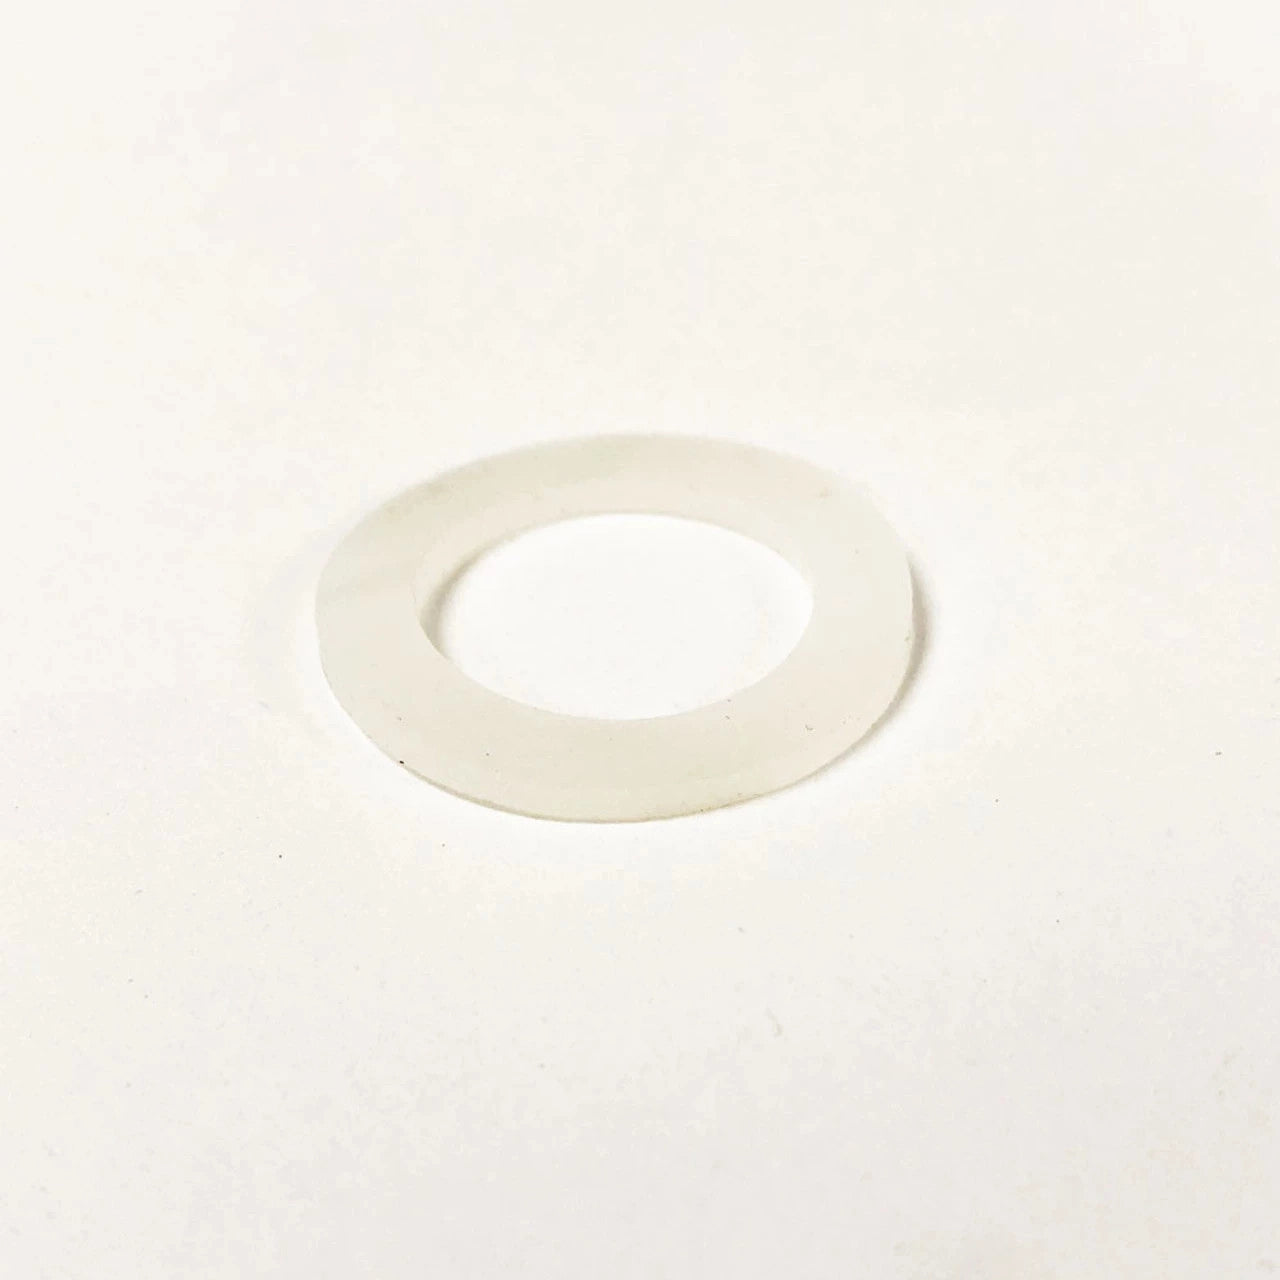 Silicone Washer for 1/2 BSP 21mm(ID) x 31mm(OD) x 2mm (thickness) - All Things Fermented | Home Brew Shop NZ | Supplies | Equipment